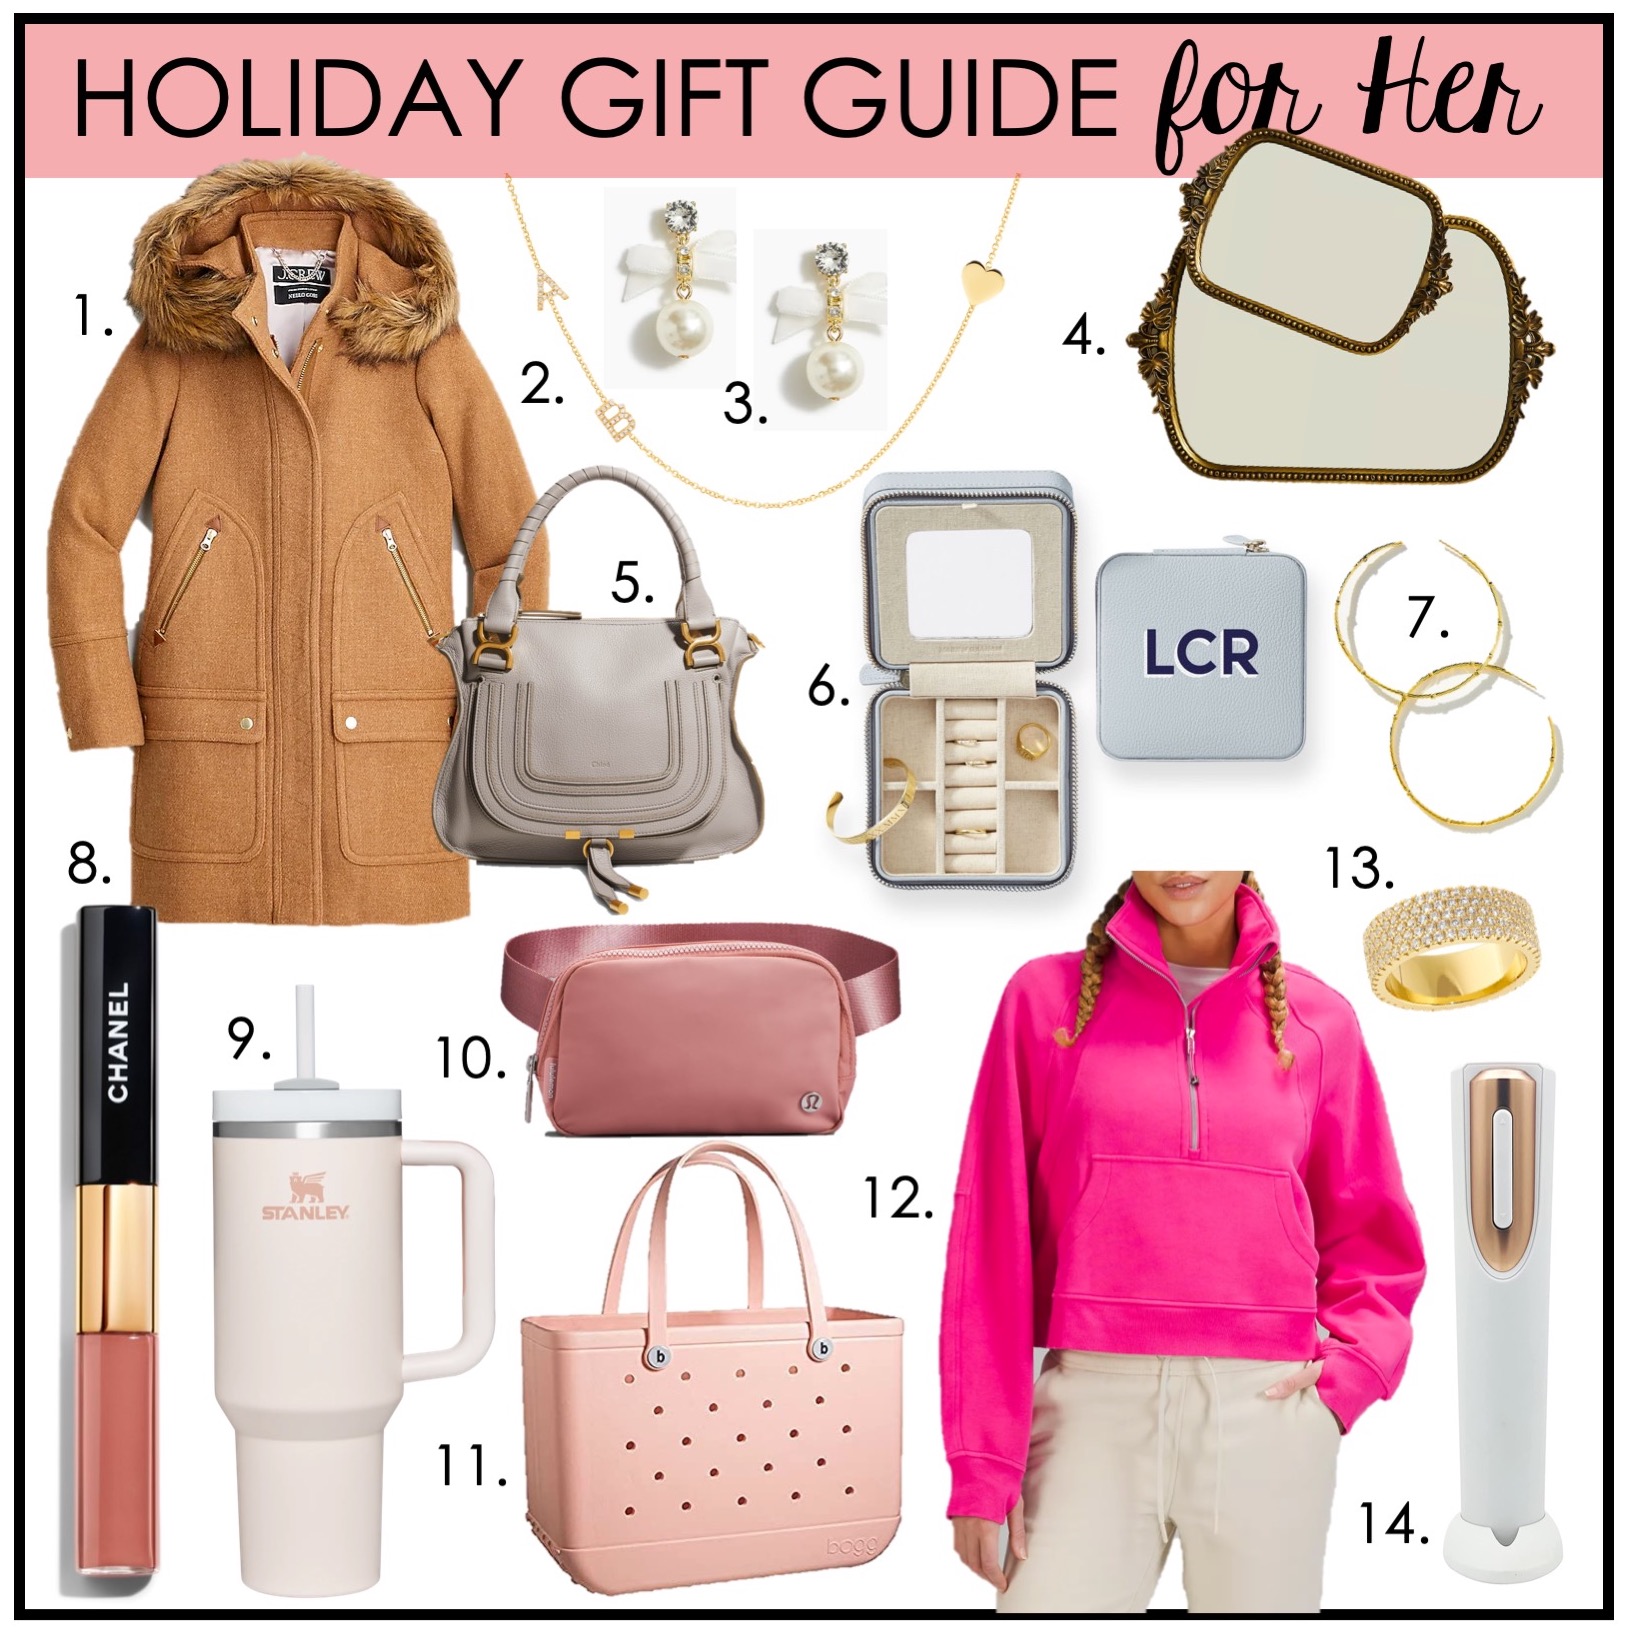 Southern In Law: Women's Christmas Gift Guide 2020